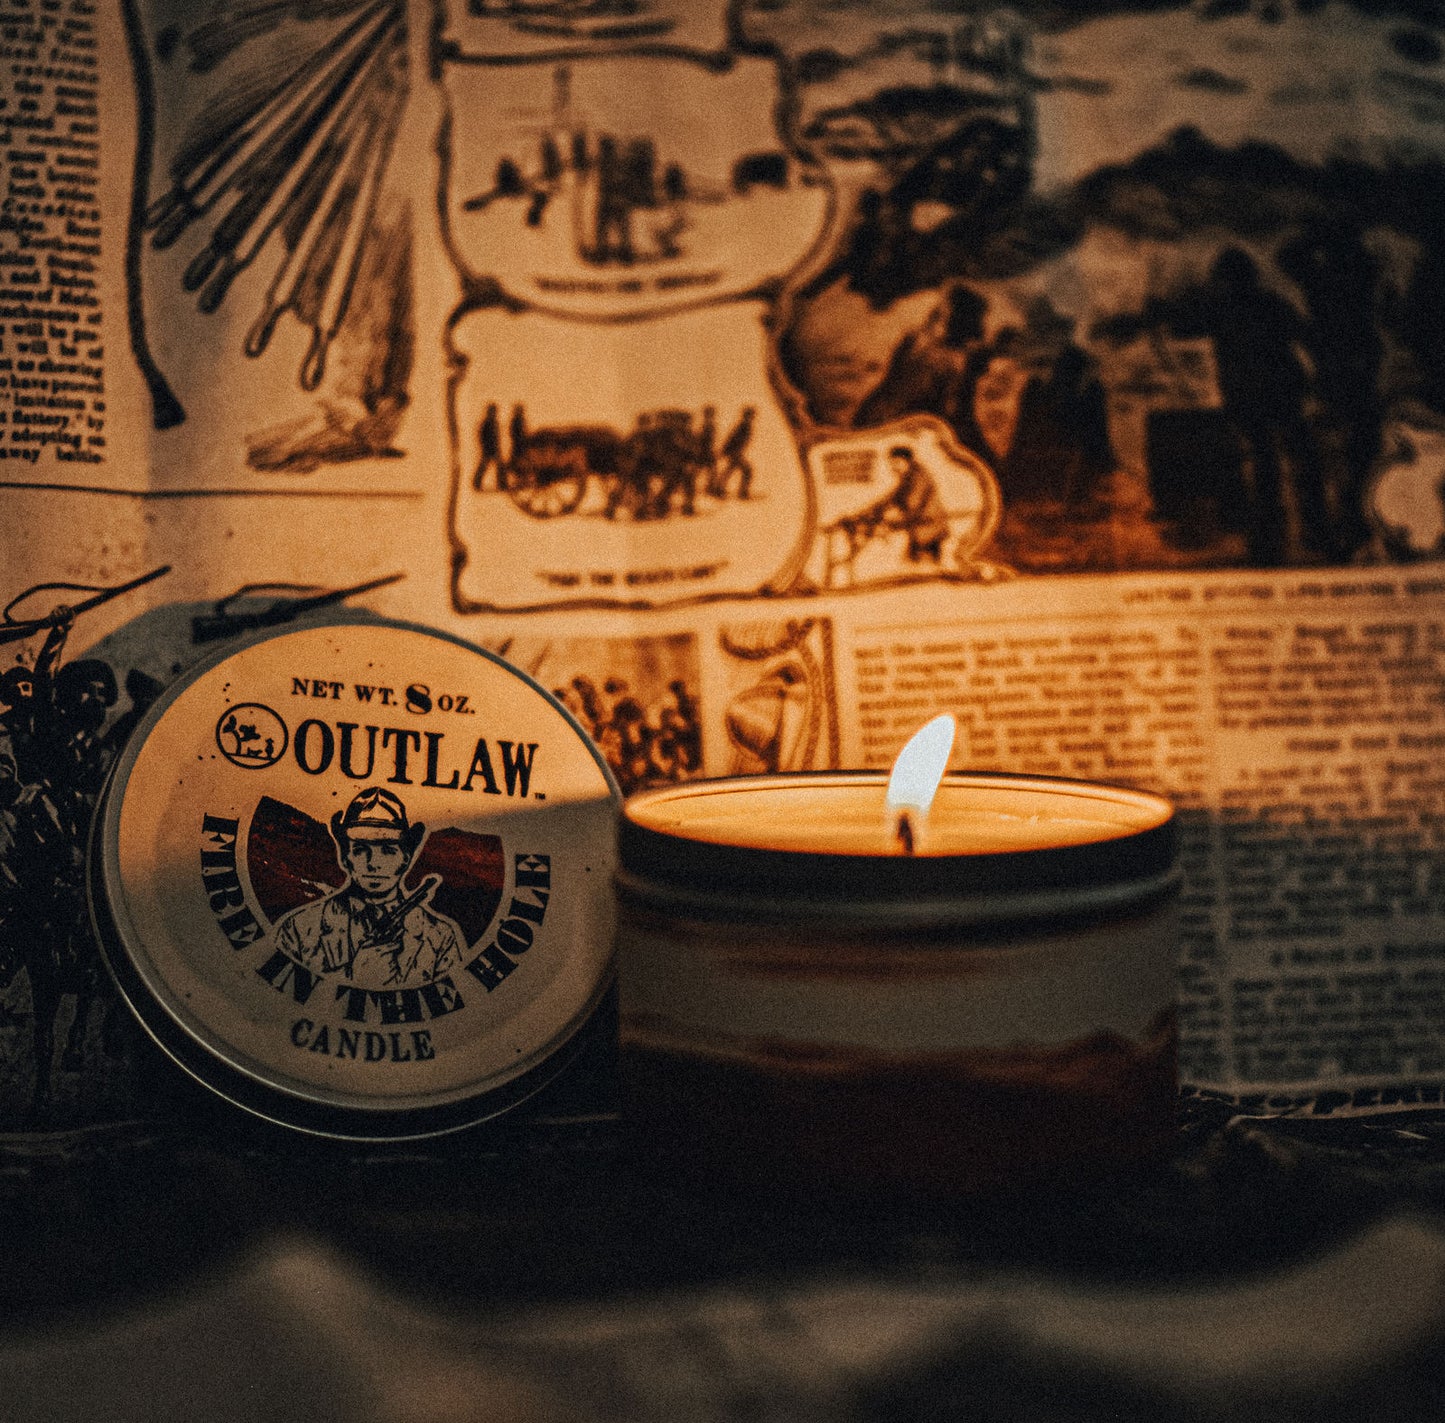 Outlaw Fire In The Hole Candle